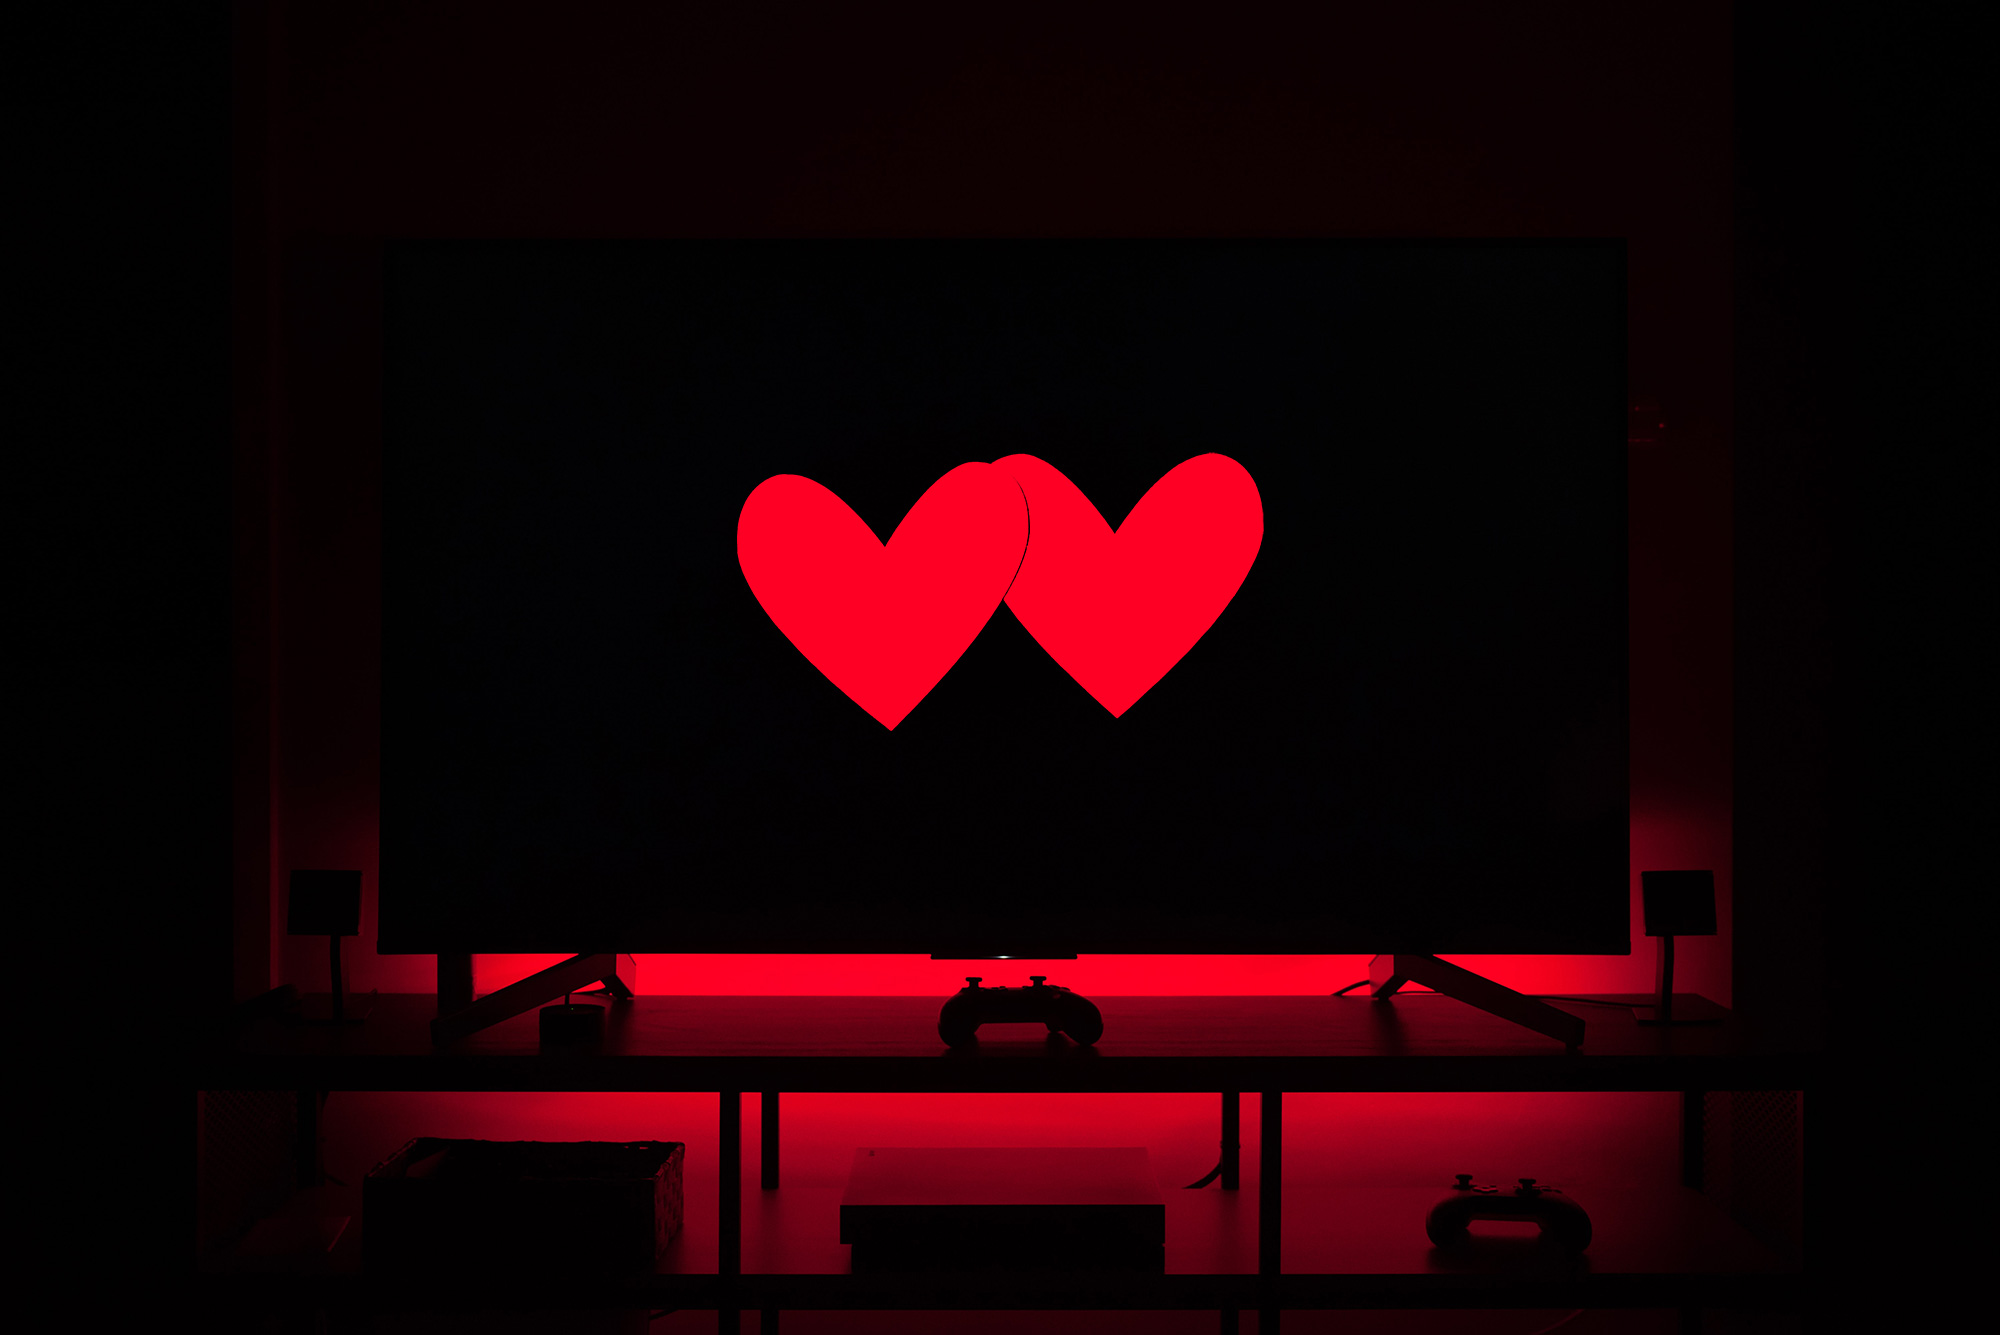 A television screen with two red paper hearts on it.